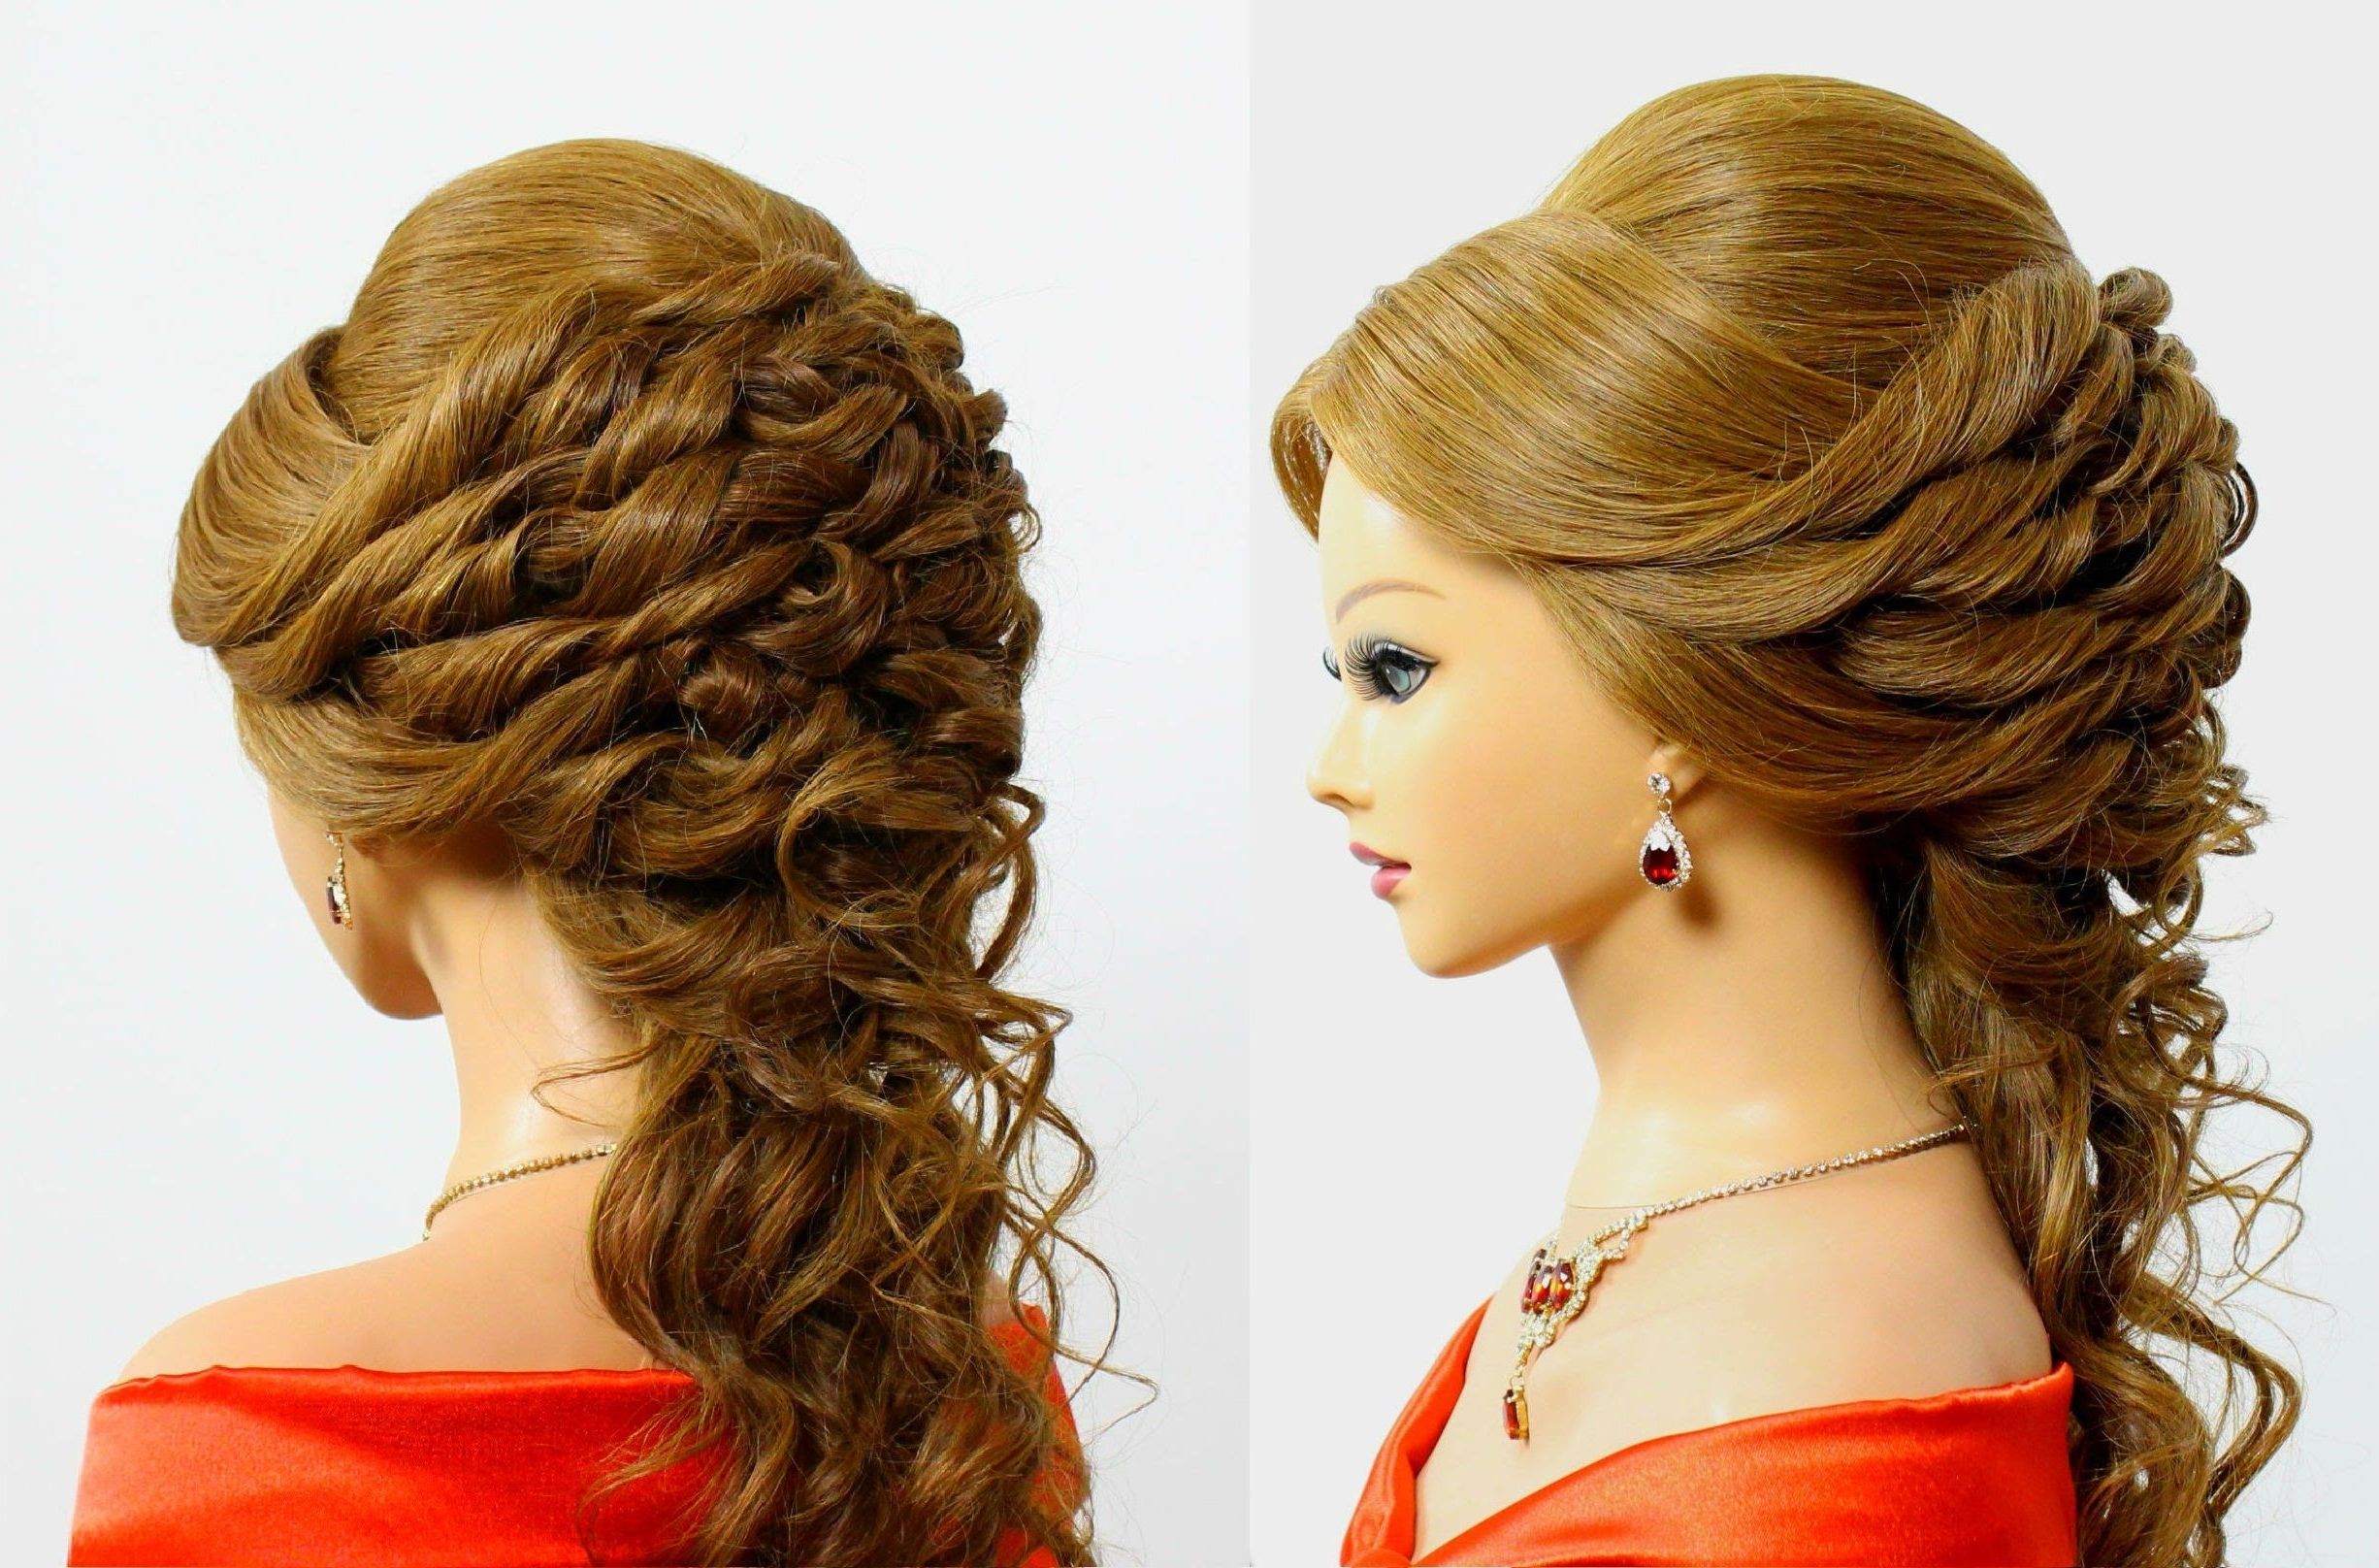 Школа Intended For Trendy Romantic Bridal Hairstyles For Medium Length Hair (View 1 of 15)